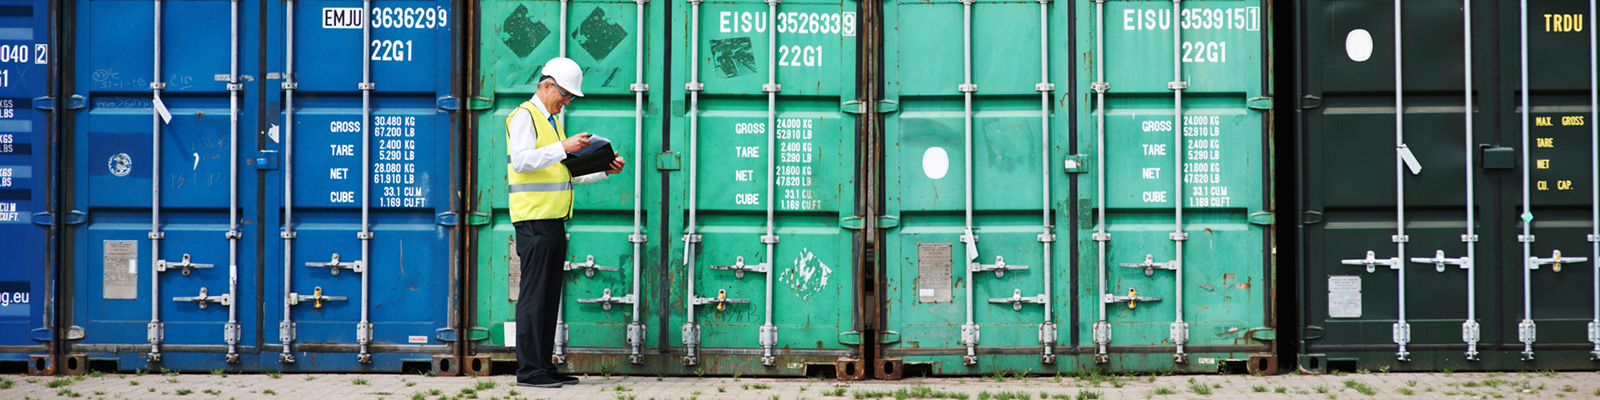 Worker in front of containers symbolizes Promotion of foreign trade and investment; Source: Getty Images/Yur_Arcurs